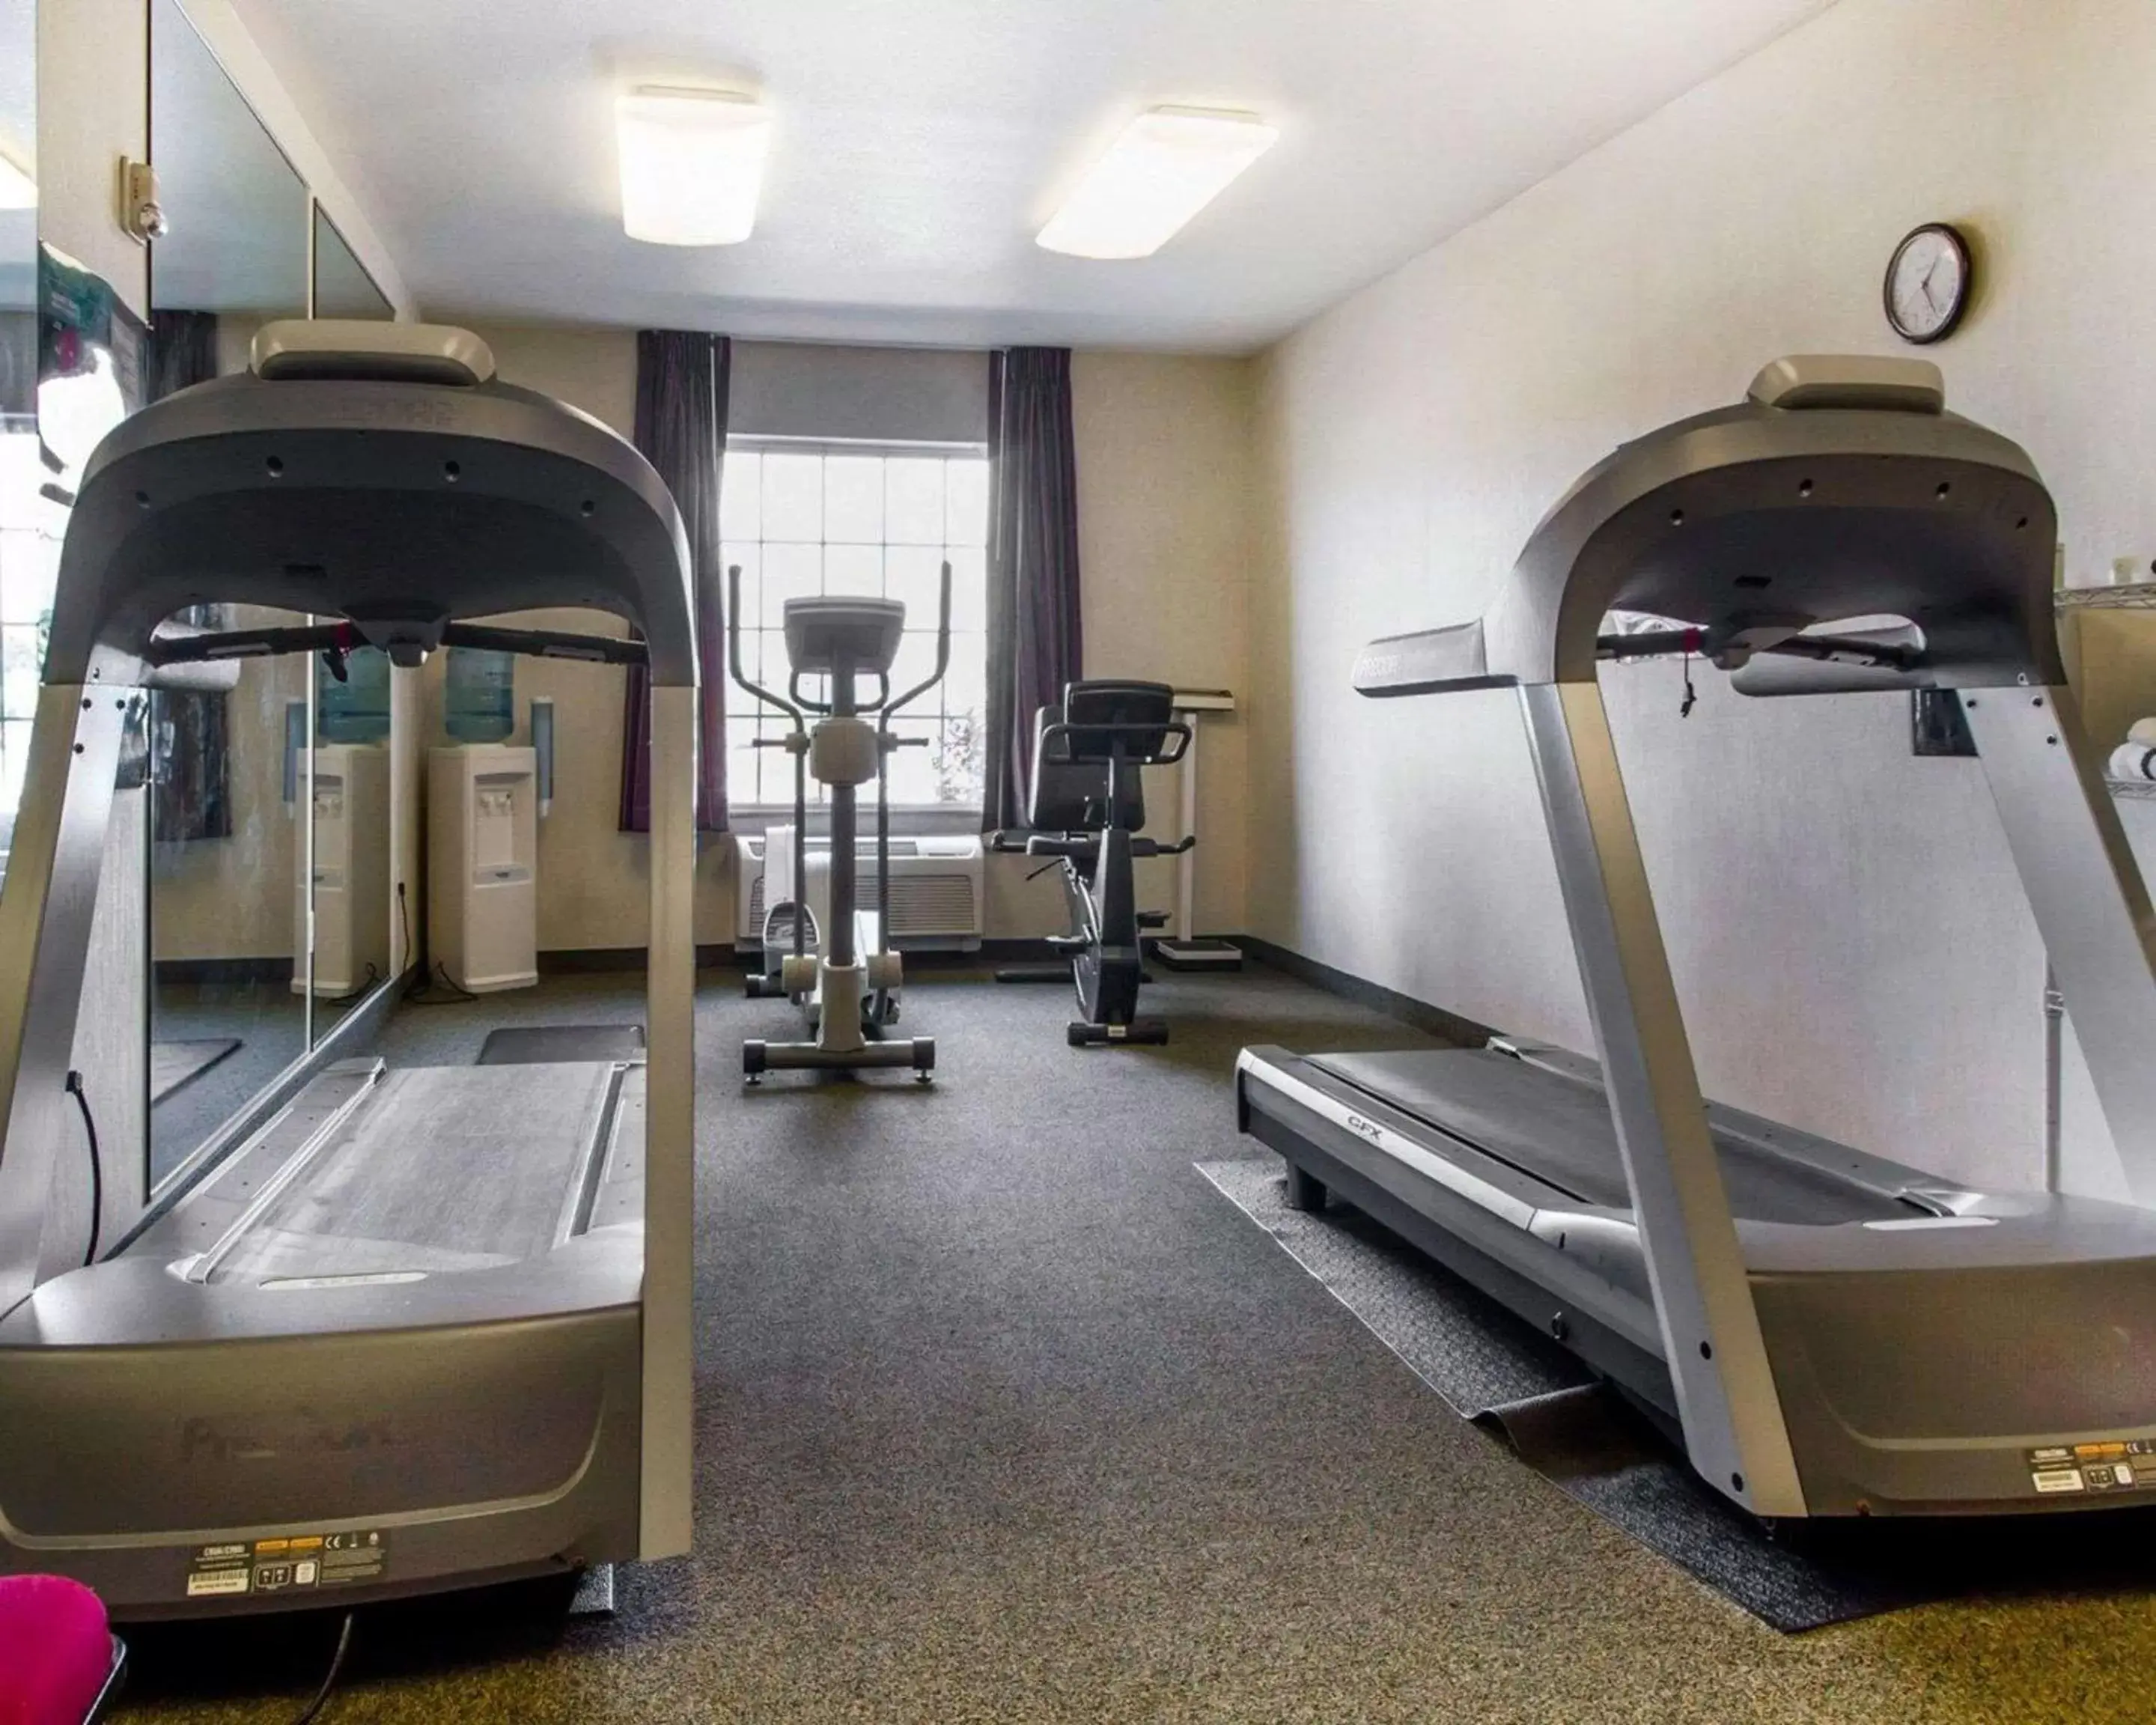 Fitness centre/facilities, Fitness Center/Facilities in Comfort Inn & Suites DeForest